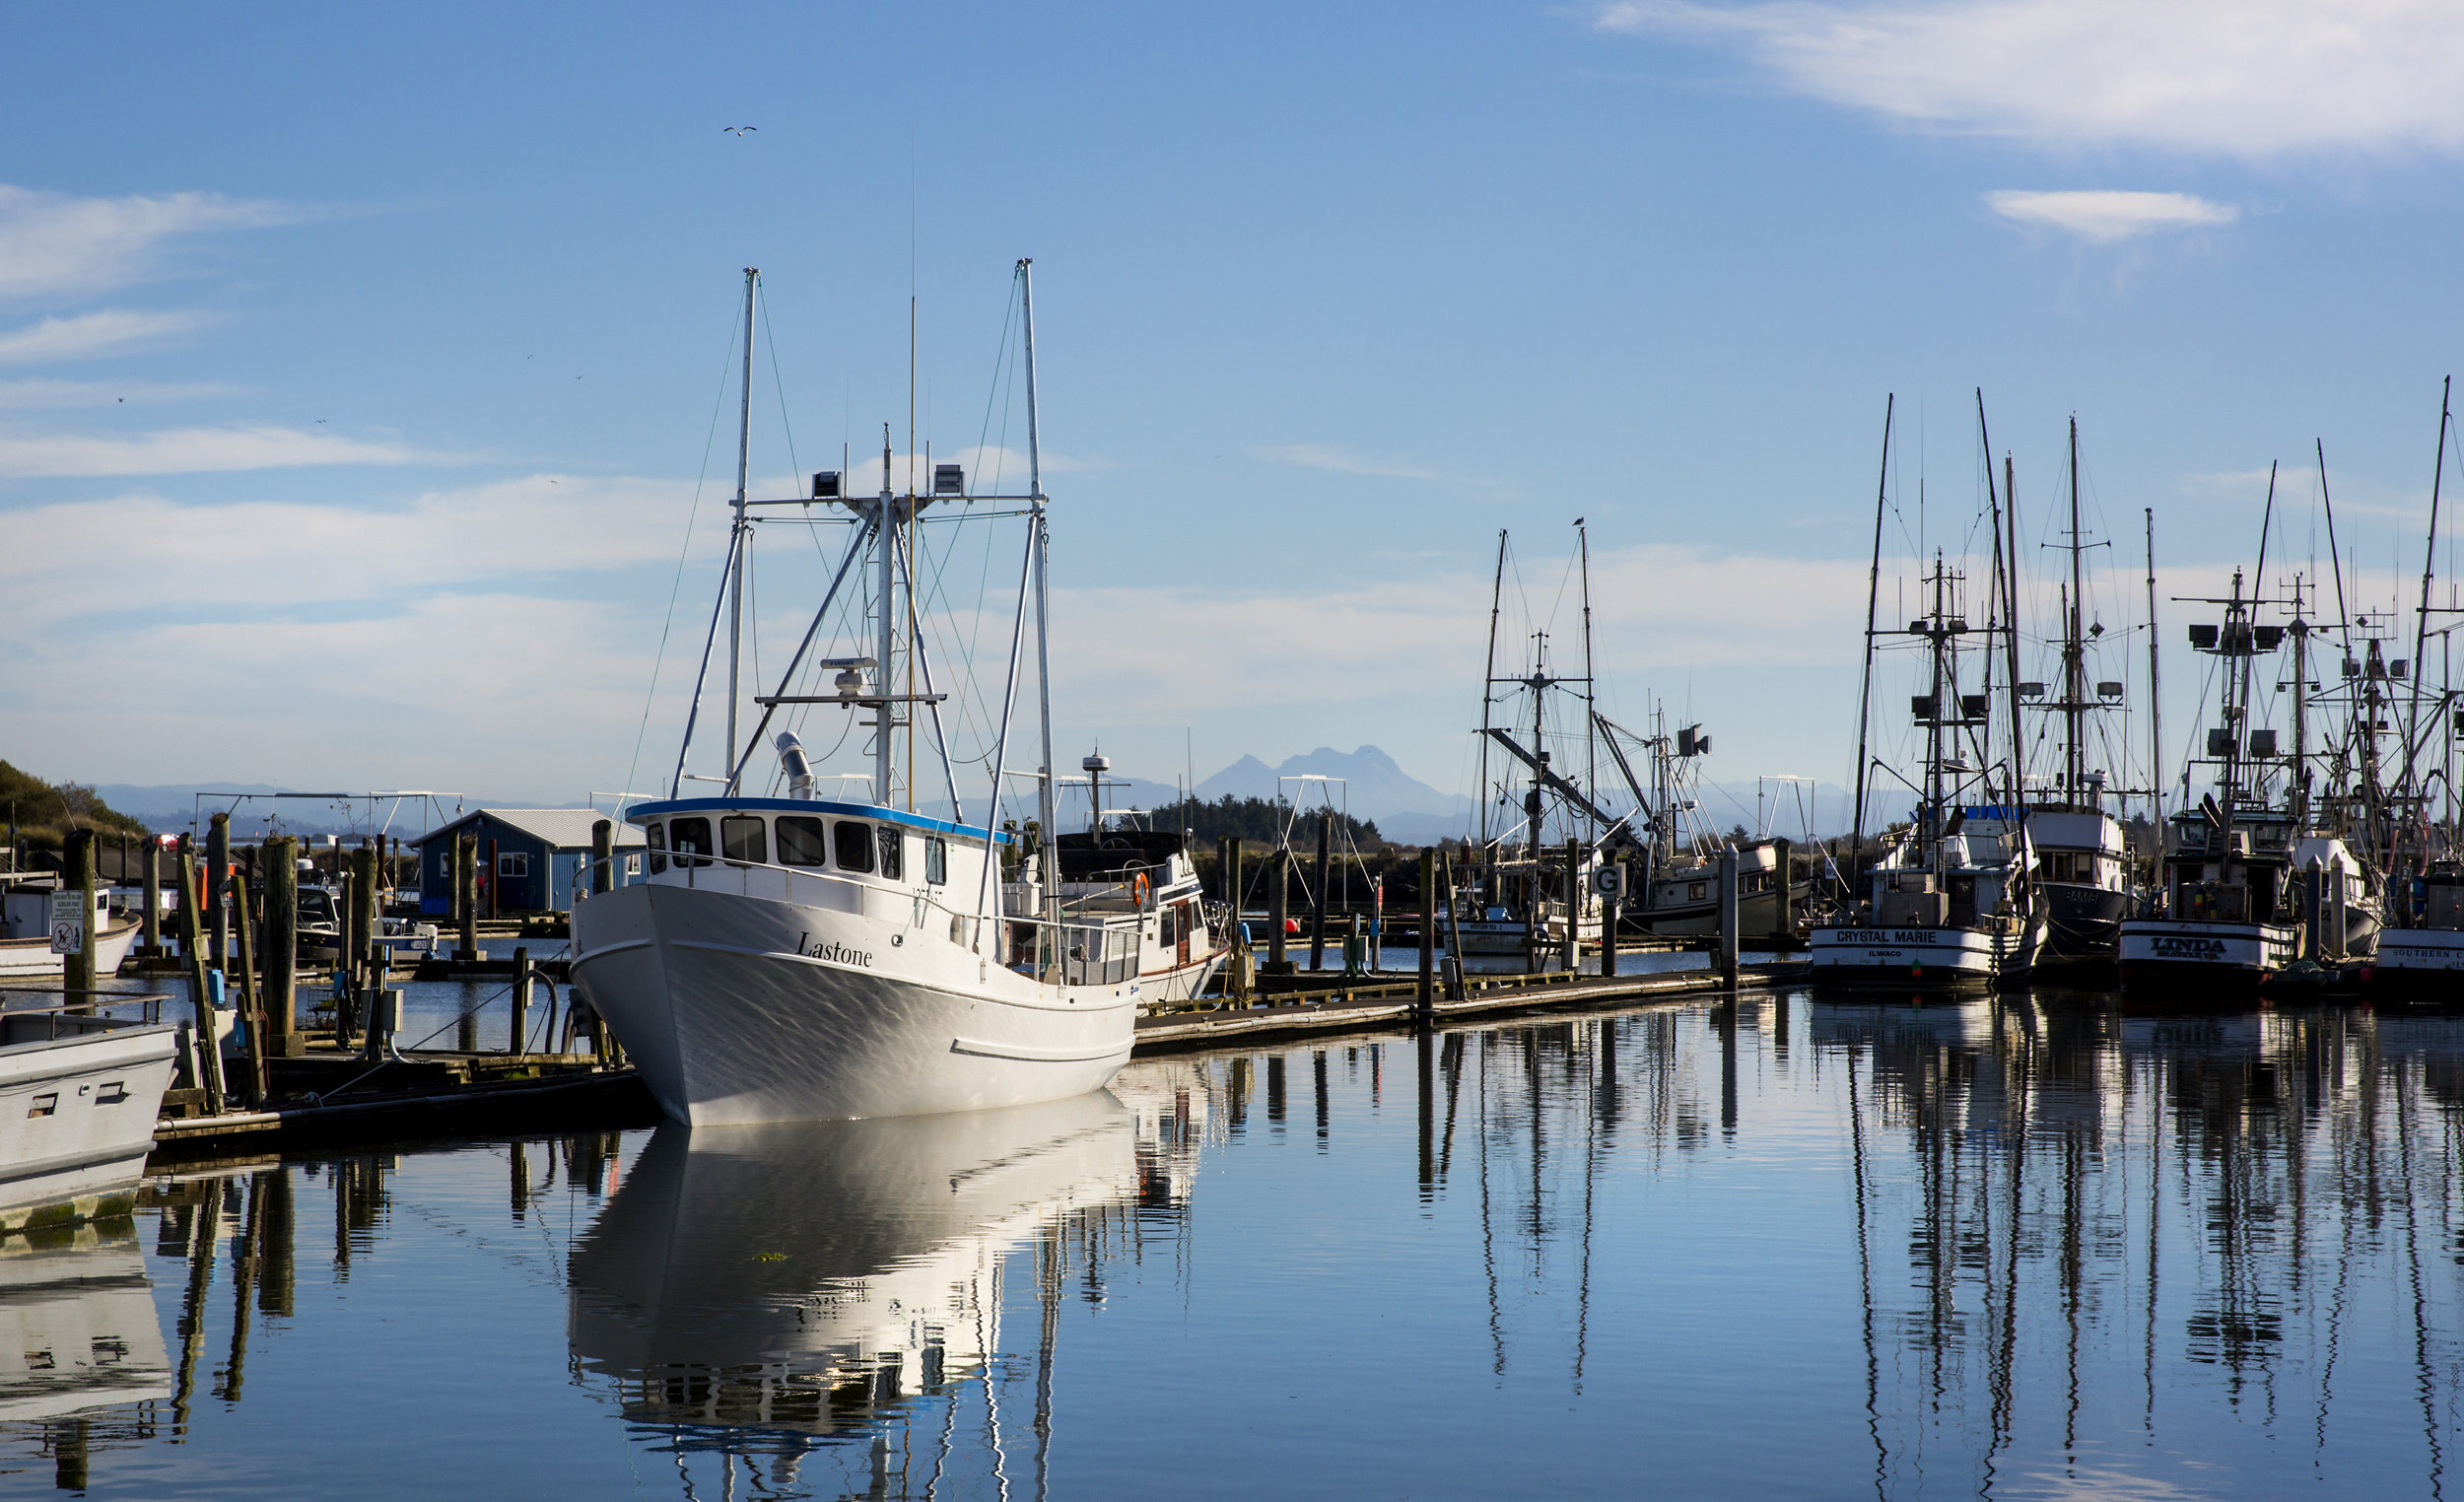  The Salt Hotel and Pub, located in the Port of Ilwaco, features scenic views of the fishing terminal, the west side of Cape Disappointment State Park, and of Baker Bay. (Sy Bean / Seattle Refined) 